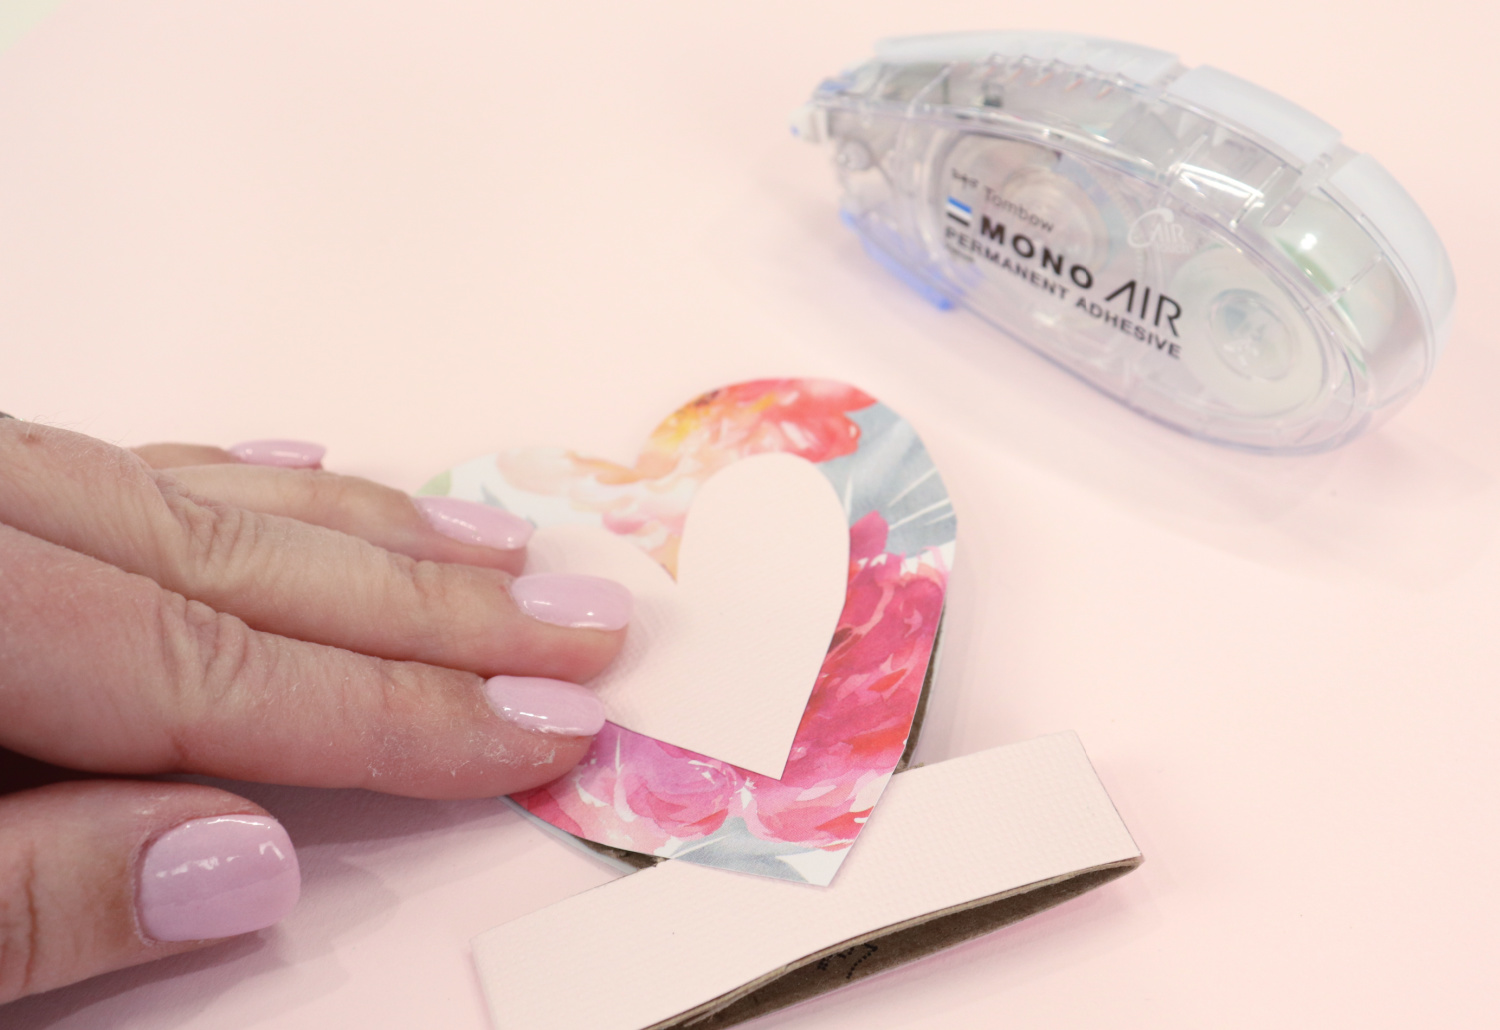 Image contains Amy’s hand pressing heart shaped scrapbook paper onto the paper roll. An adhesive runner sits off to the side on a pink background.